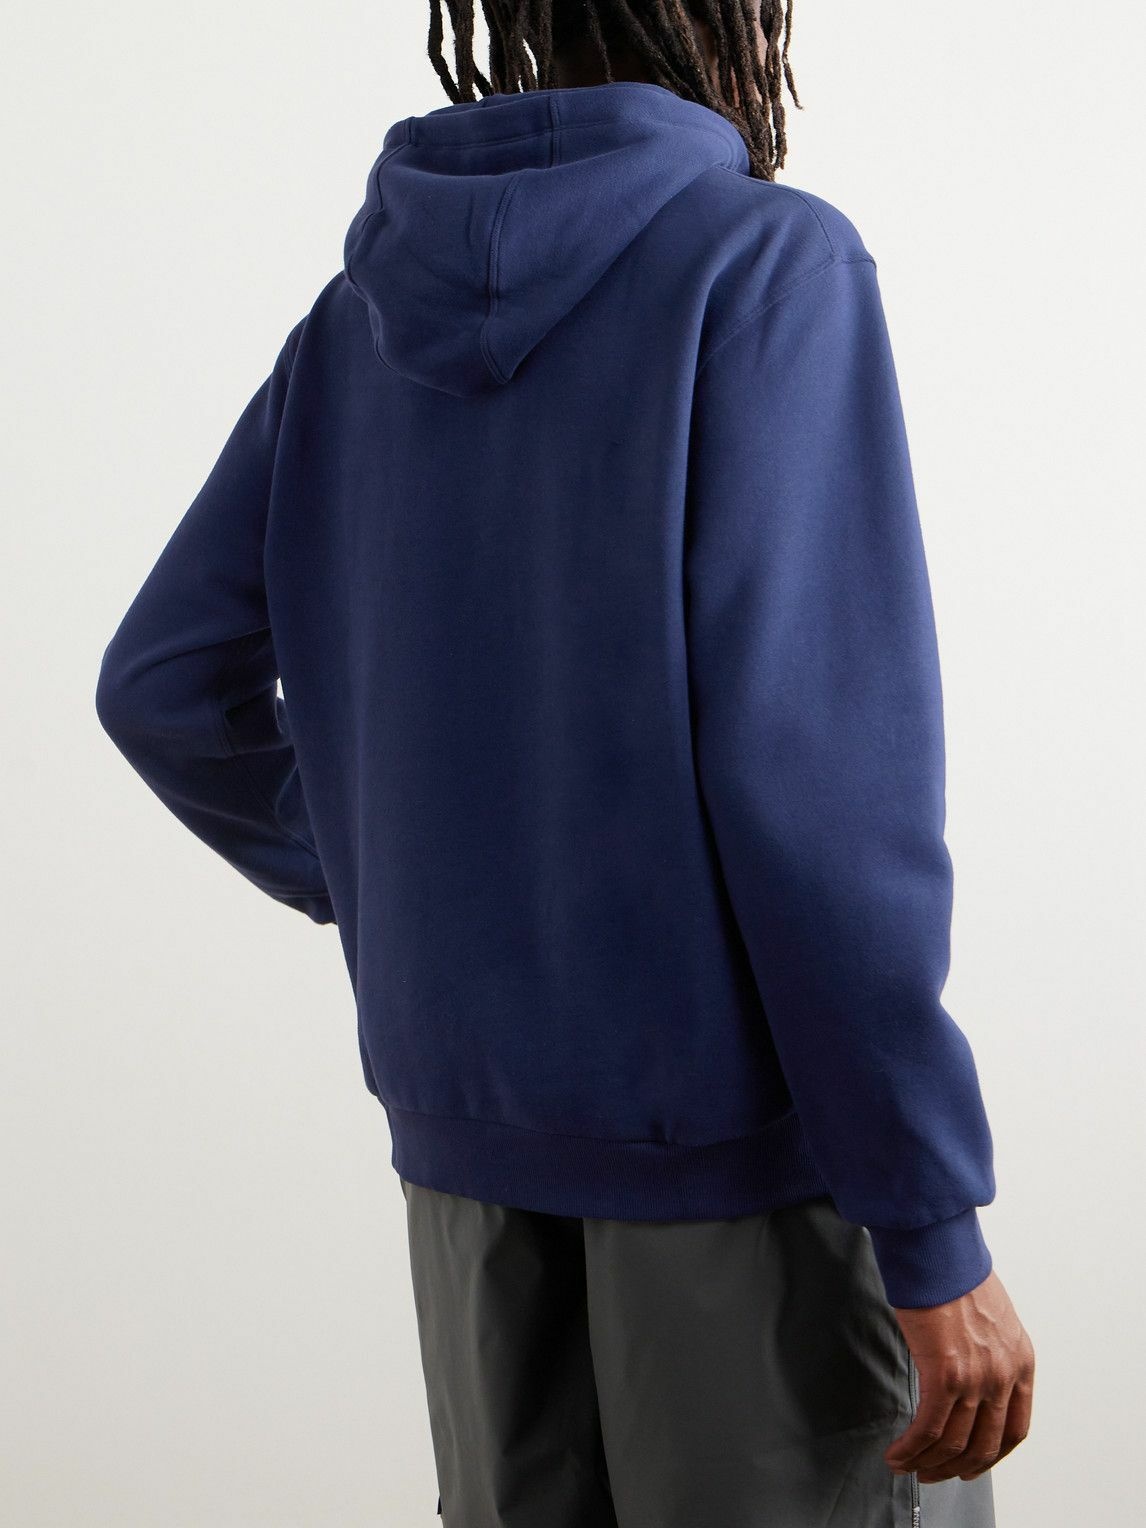 lululemon athletica Steady State Cotton-blend Hoodie in Blue for